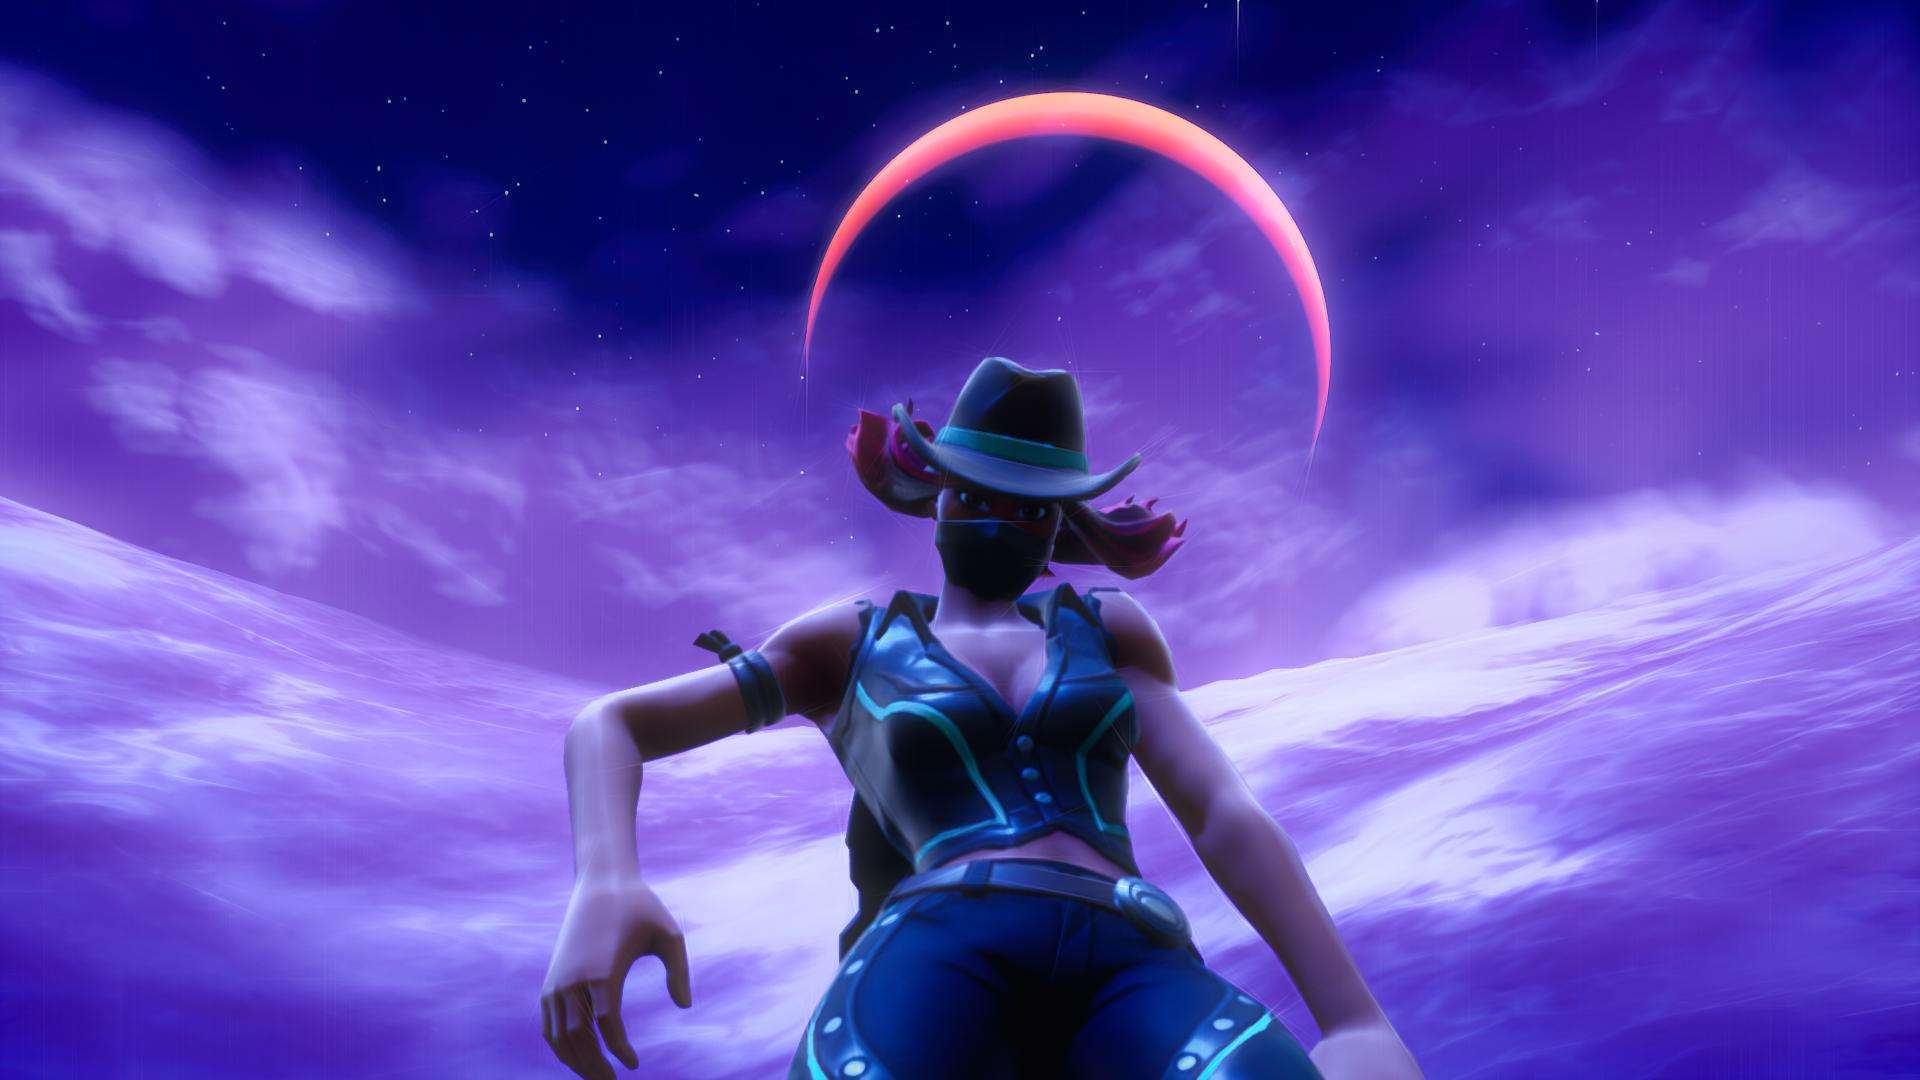 Calamity Fortnite Wallpapers posted by Ryan Sellers.